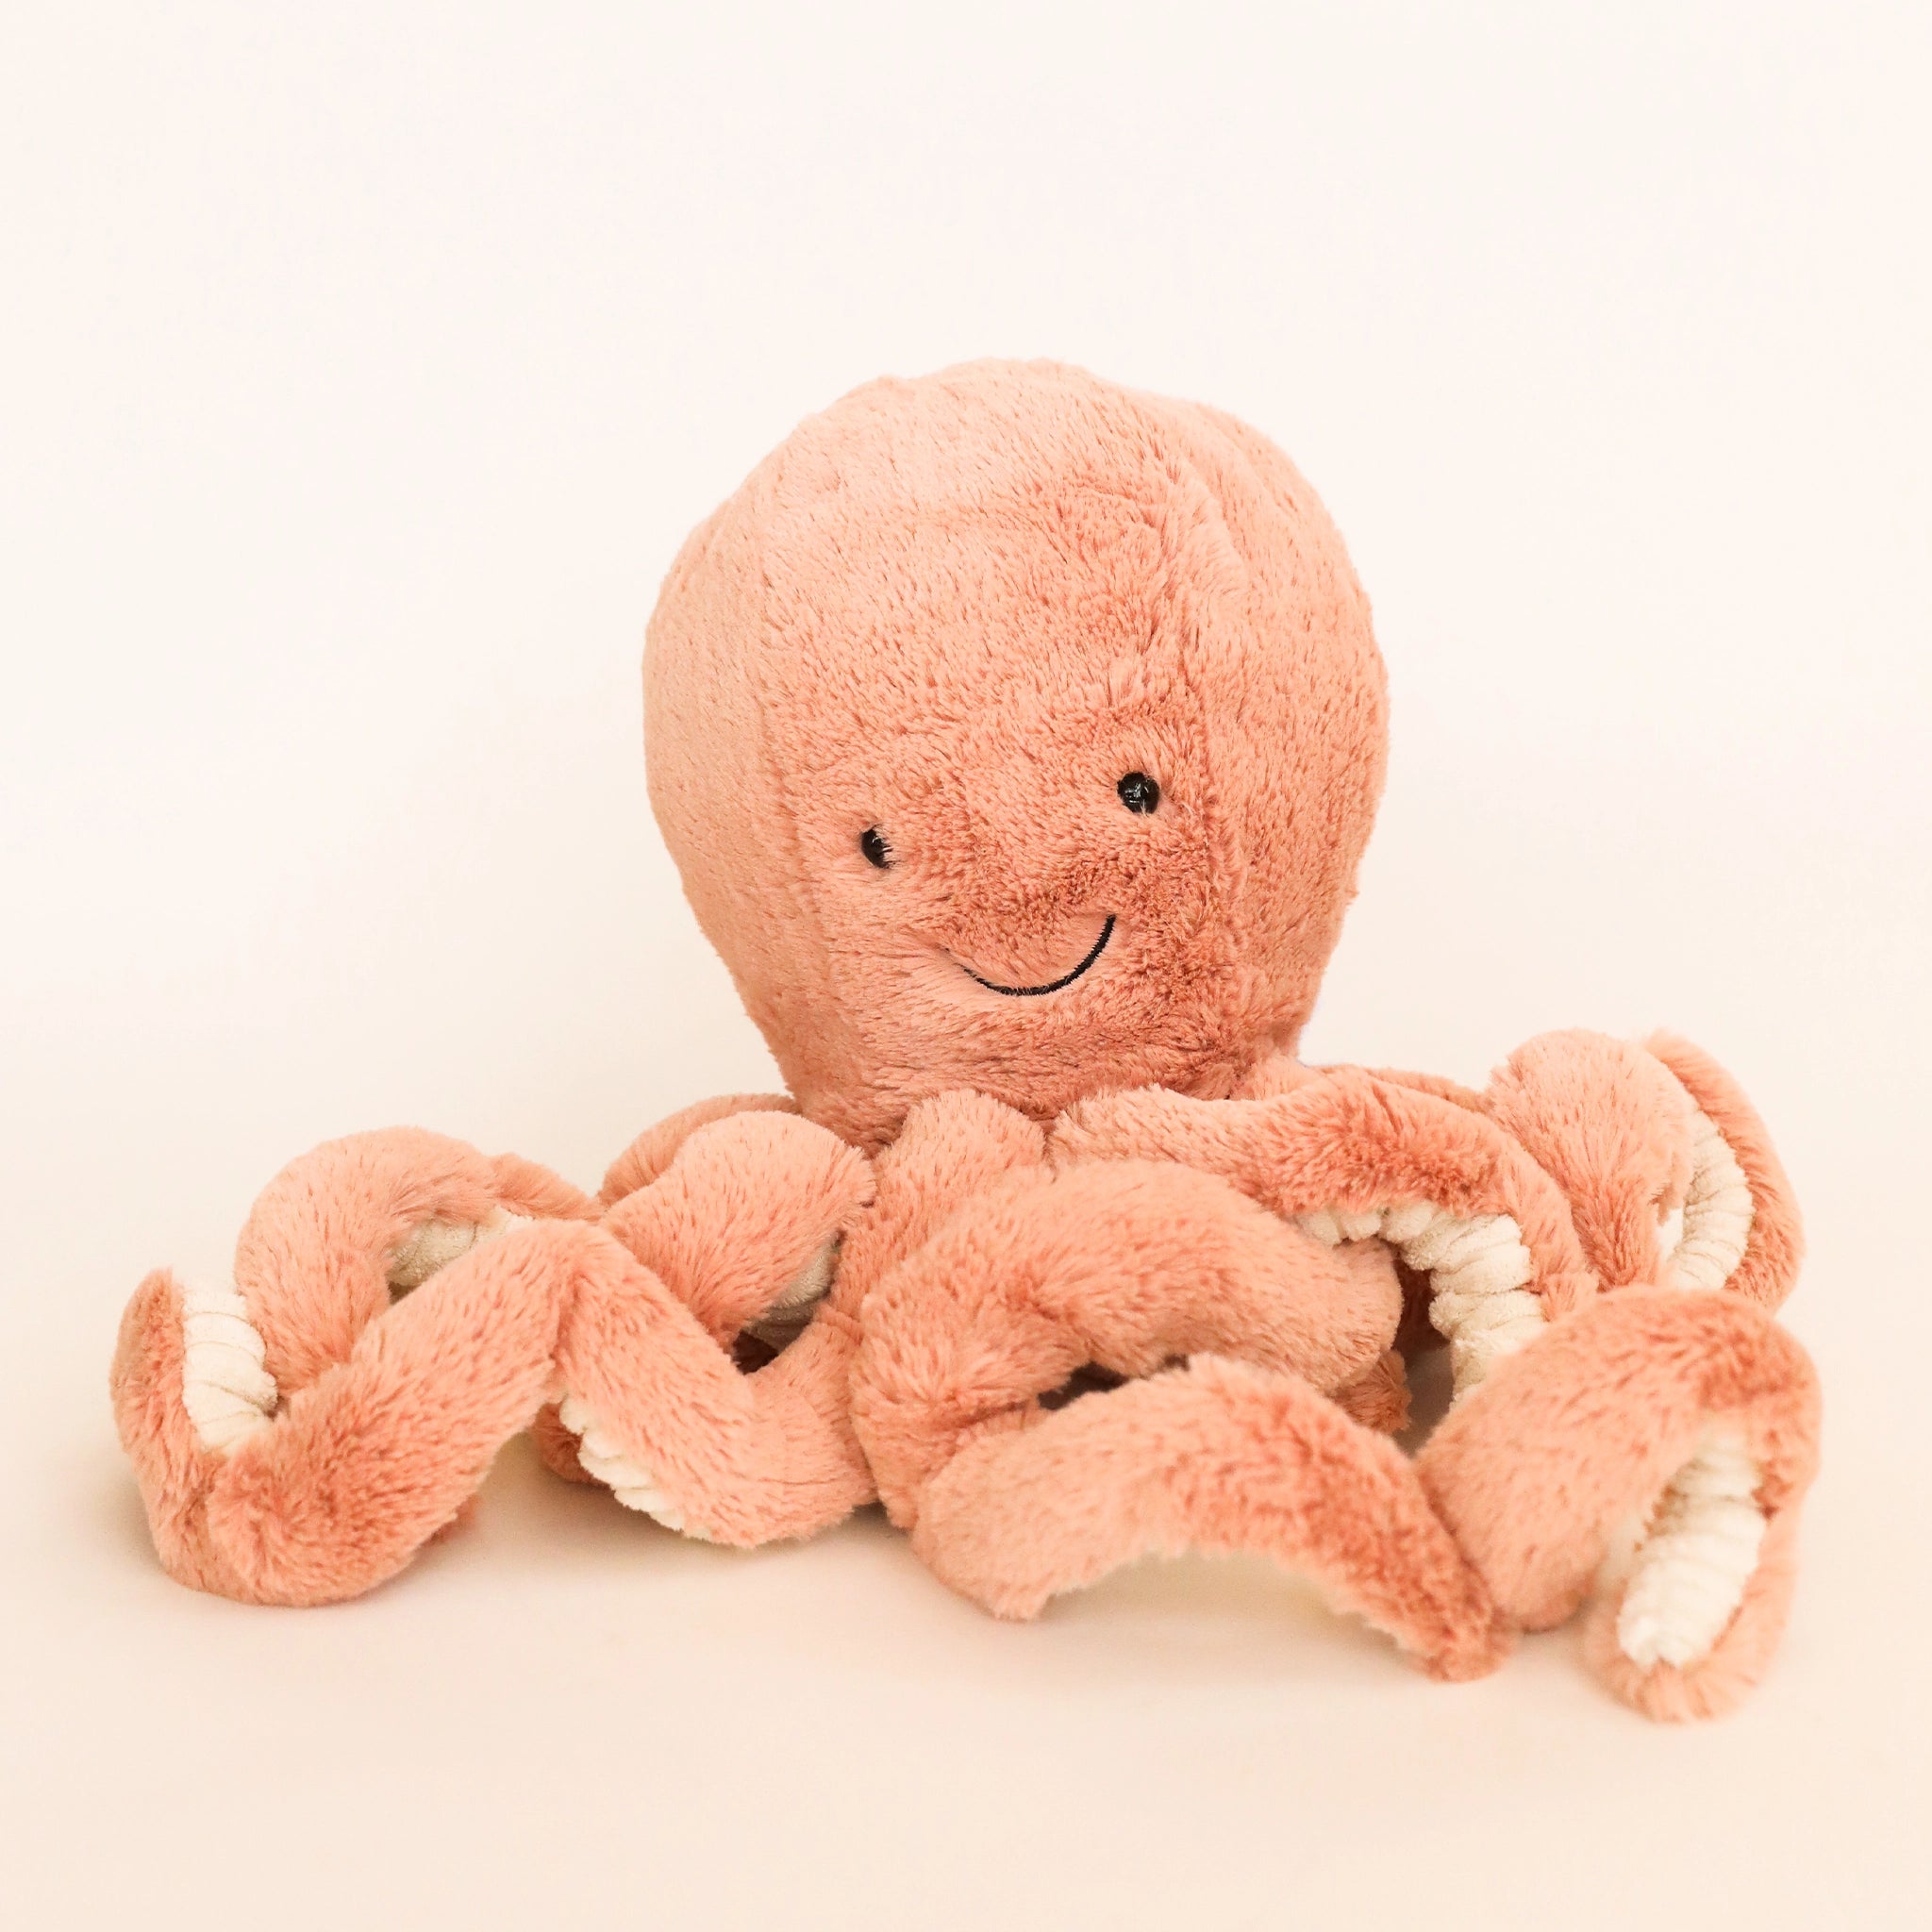 A pink octopus stuffed animal with a smiling face, photographed on a cream background. 